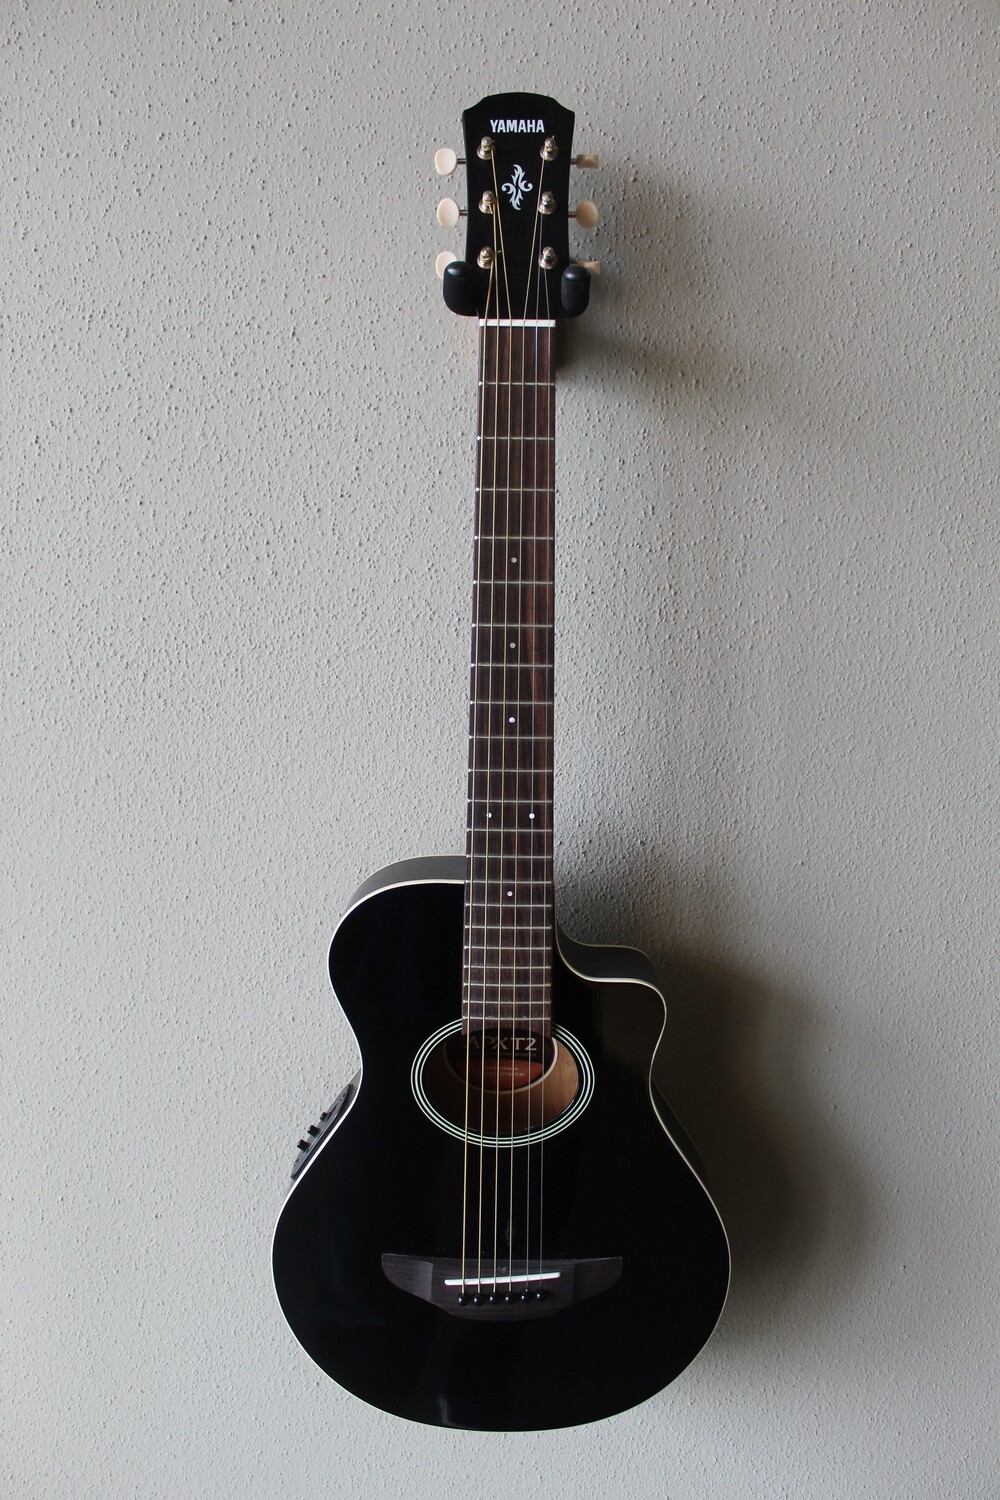 Yamaha APXT2 3/4 Size Steel String Acoustic/Electric Guitar with Gig Bag - Black